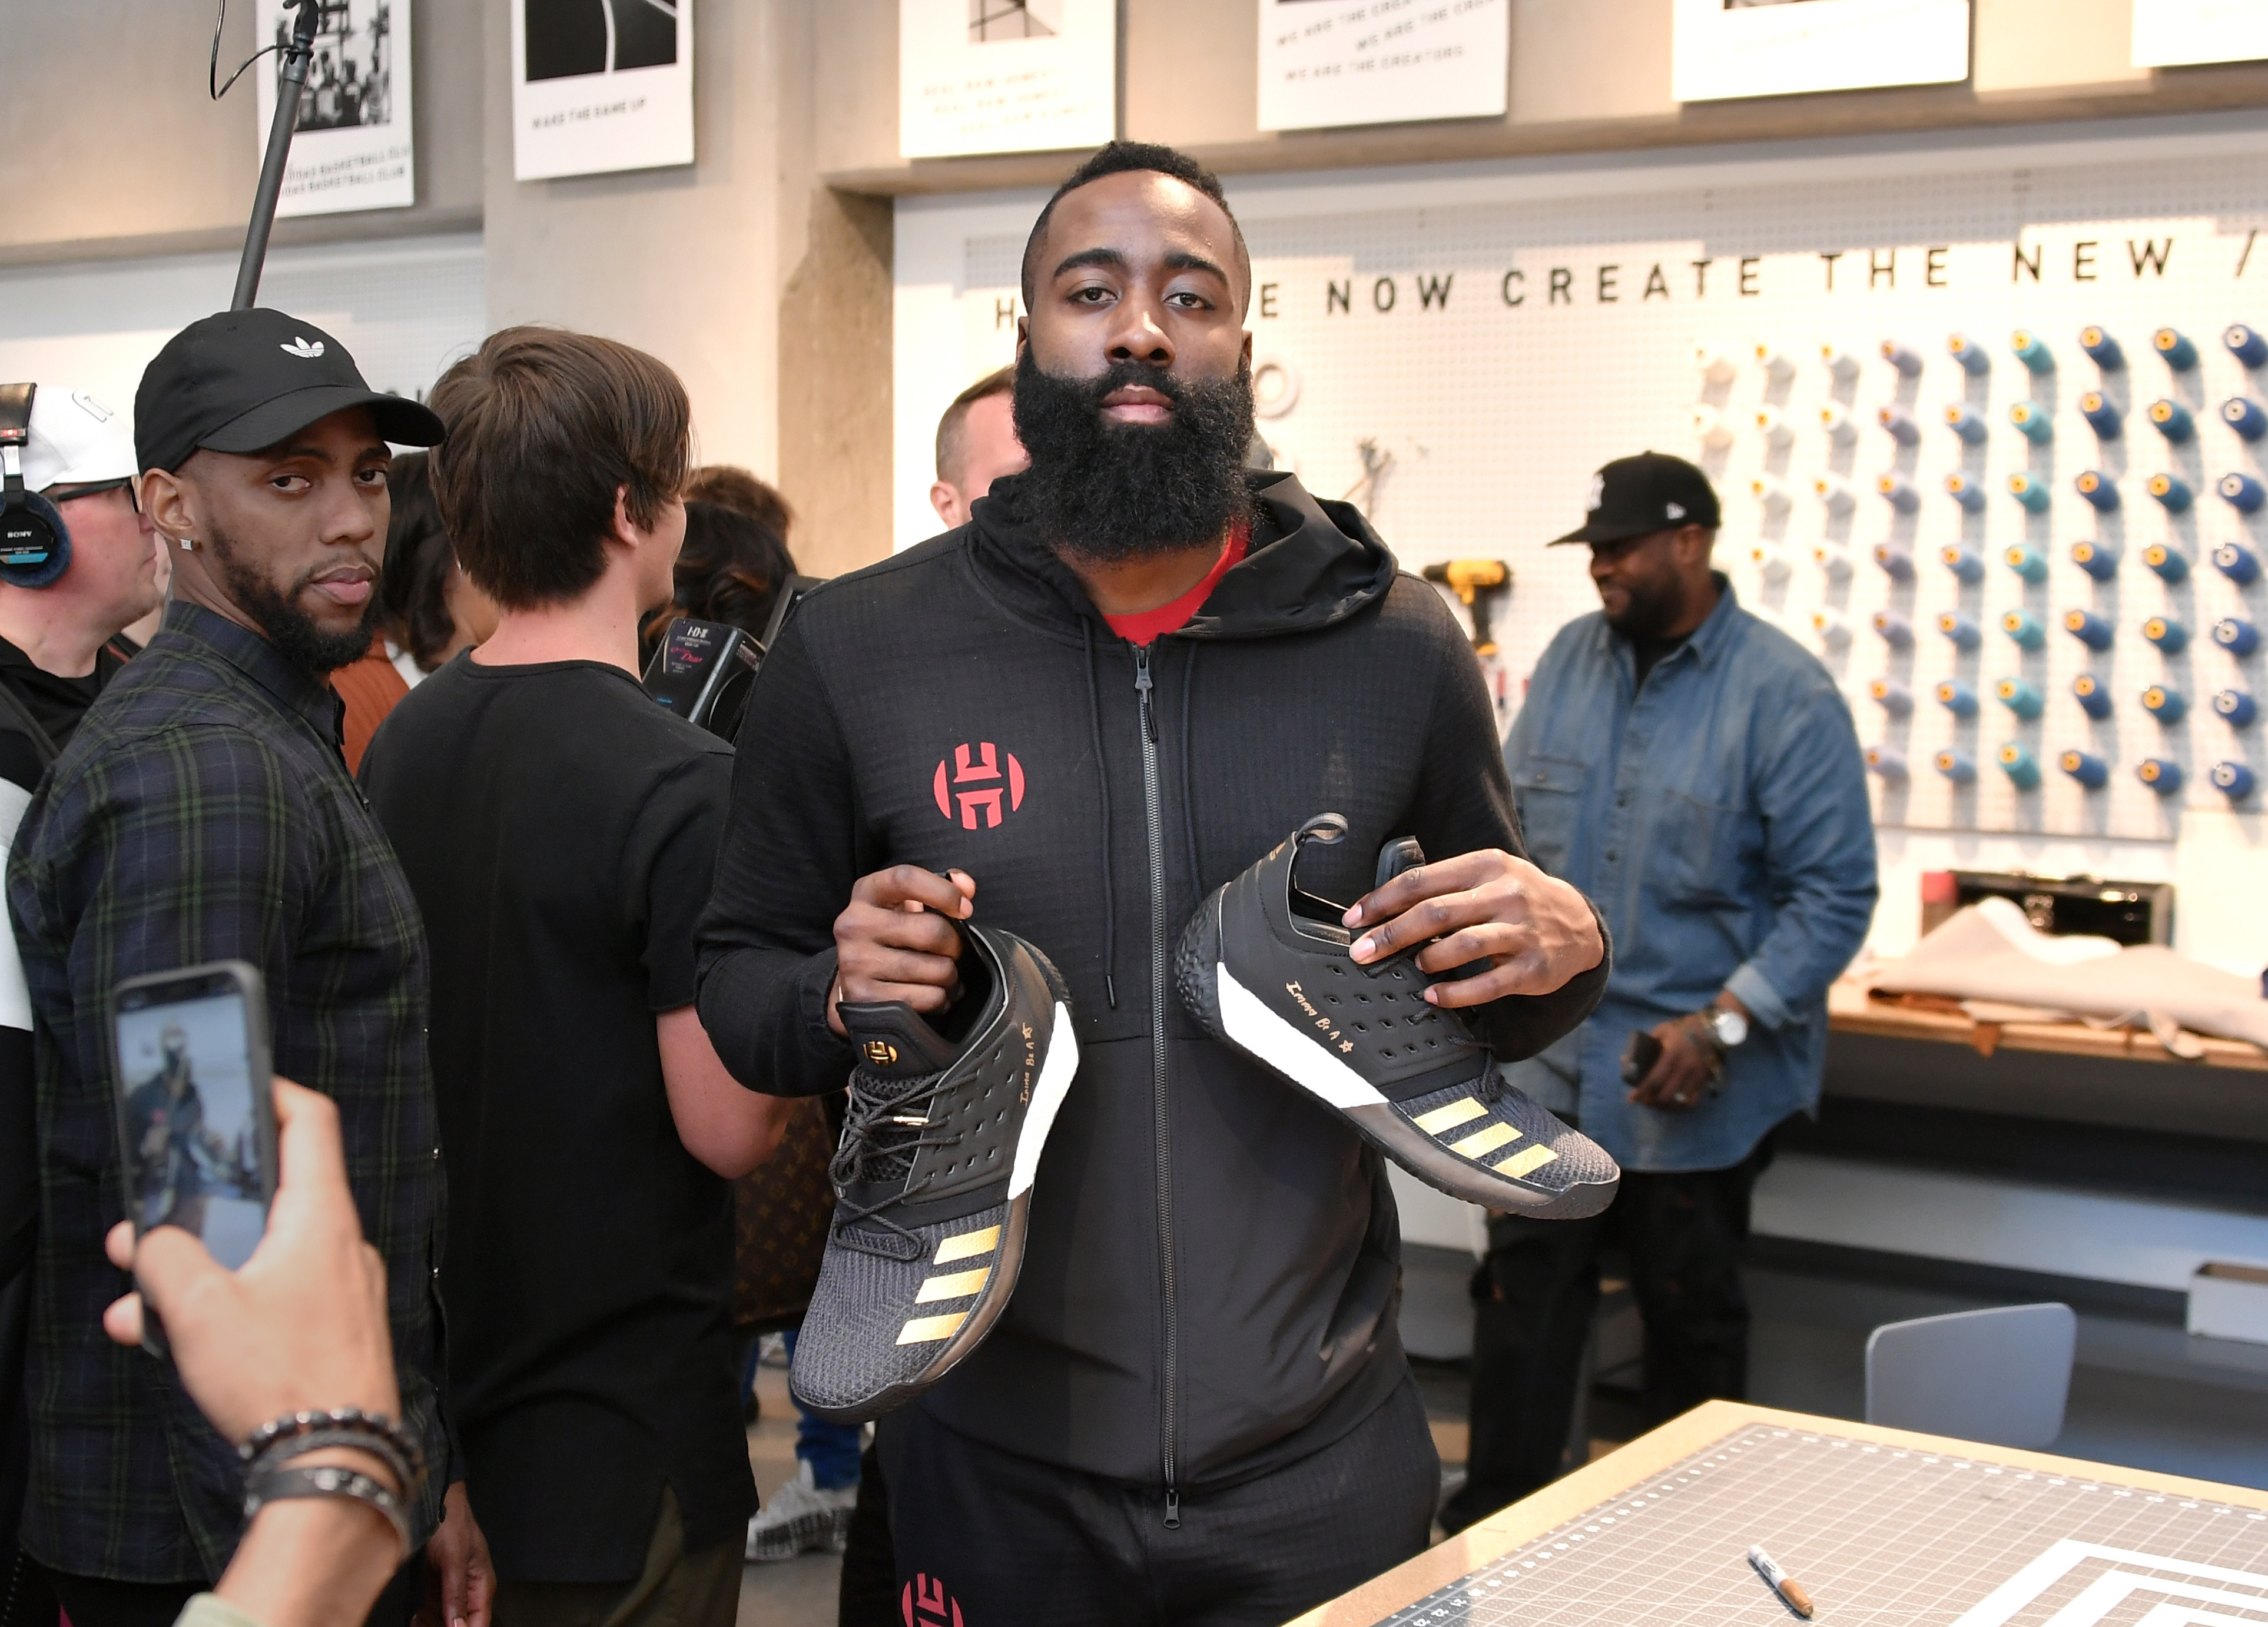 Foot Locker - James Harden unveils a new colorway of his signature